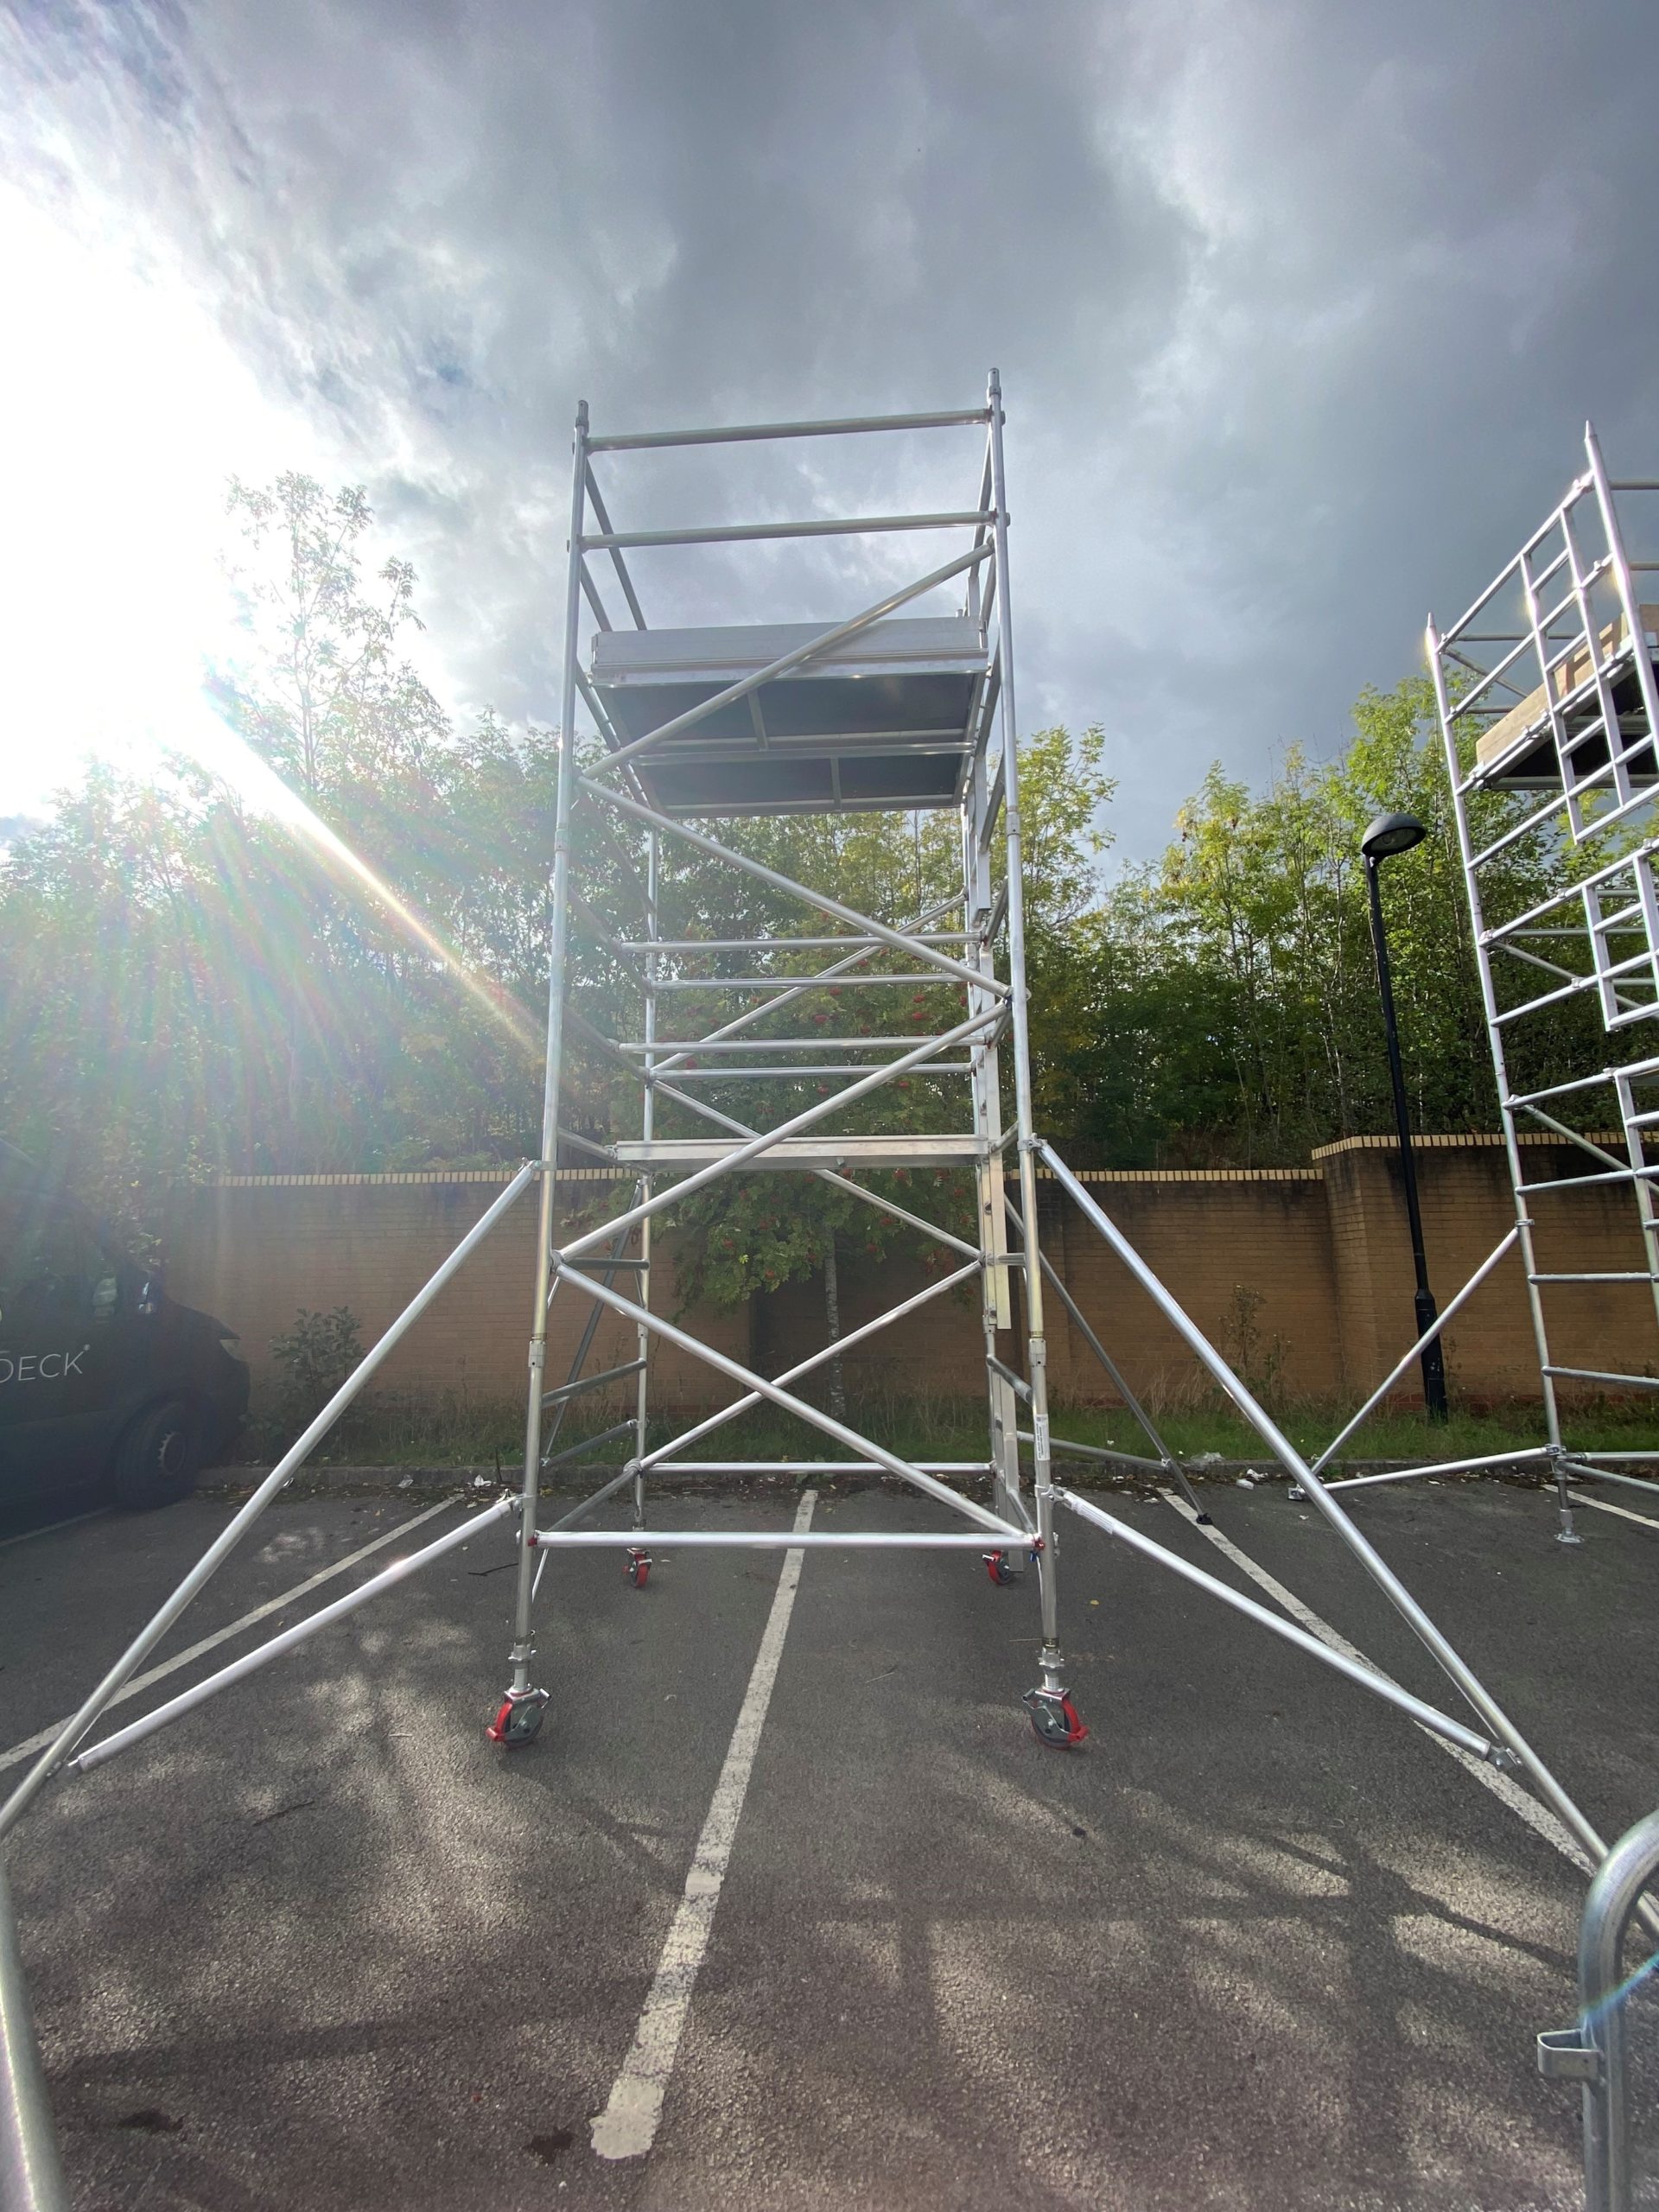 Mobile access tower 3T